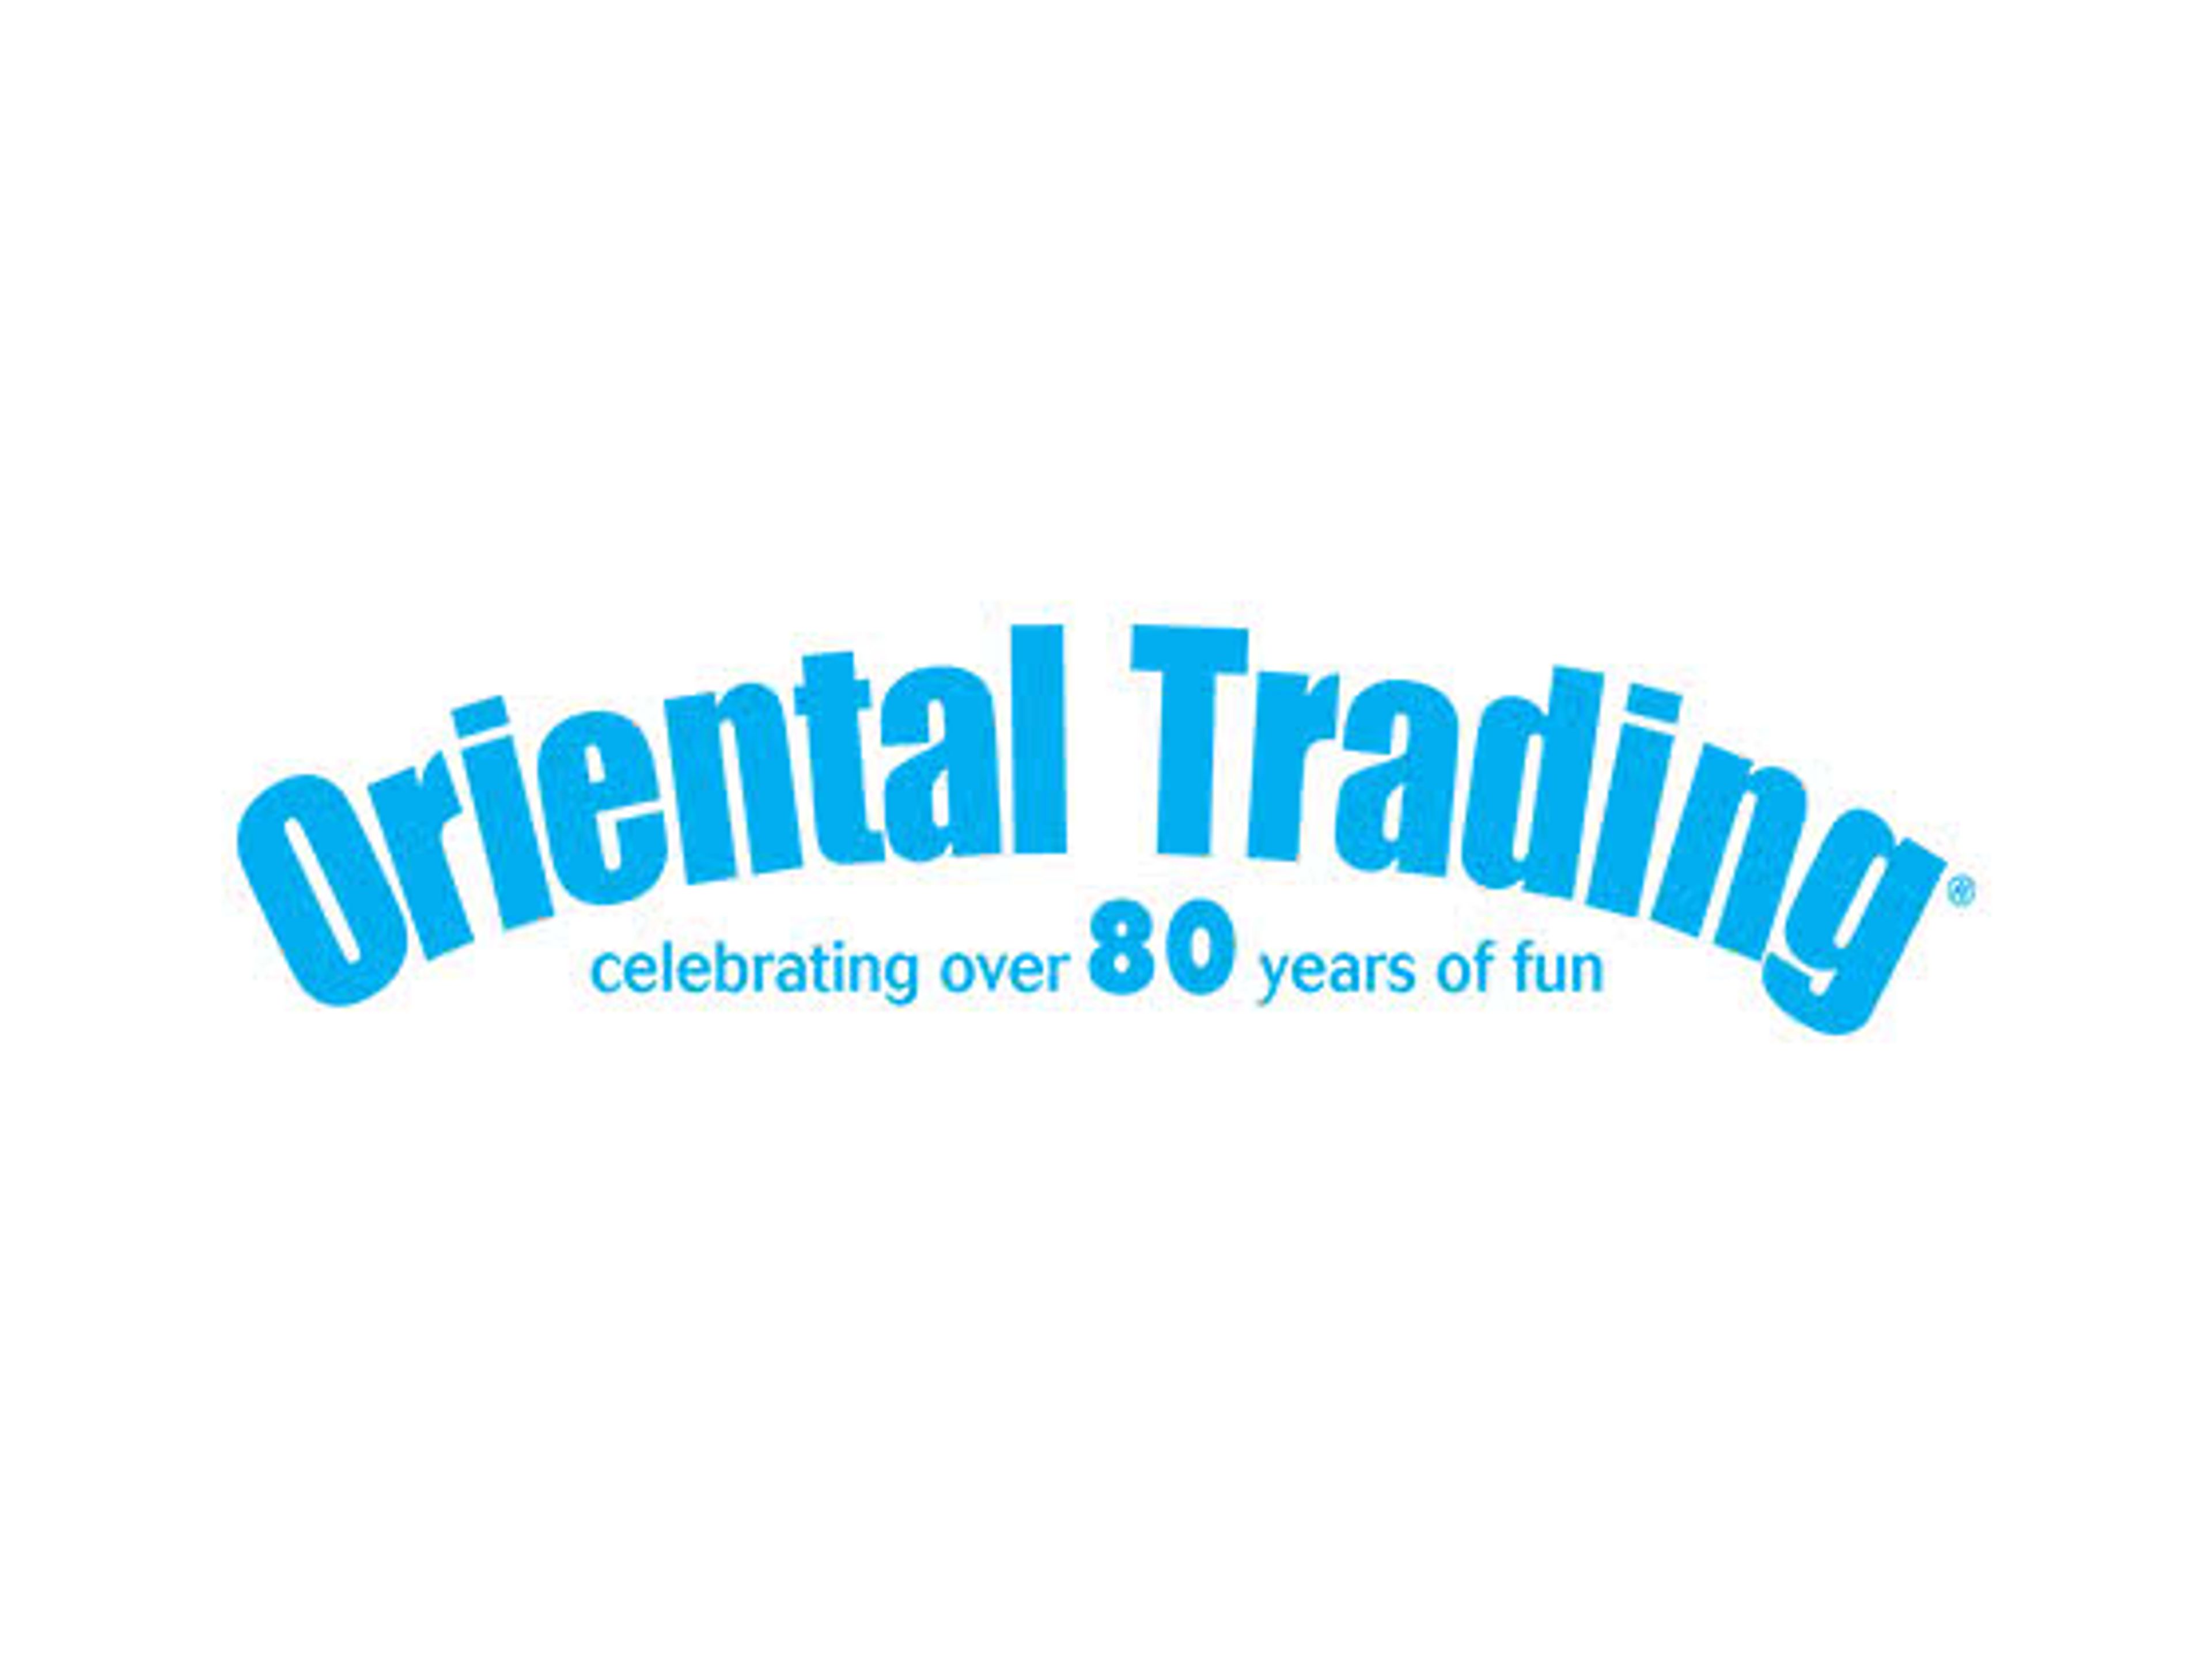 Oriental Trading Coupon Find All Oriental Trading Coupons & Promo Codes